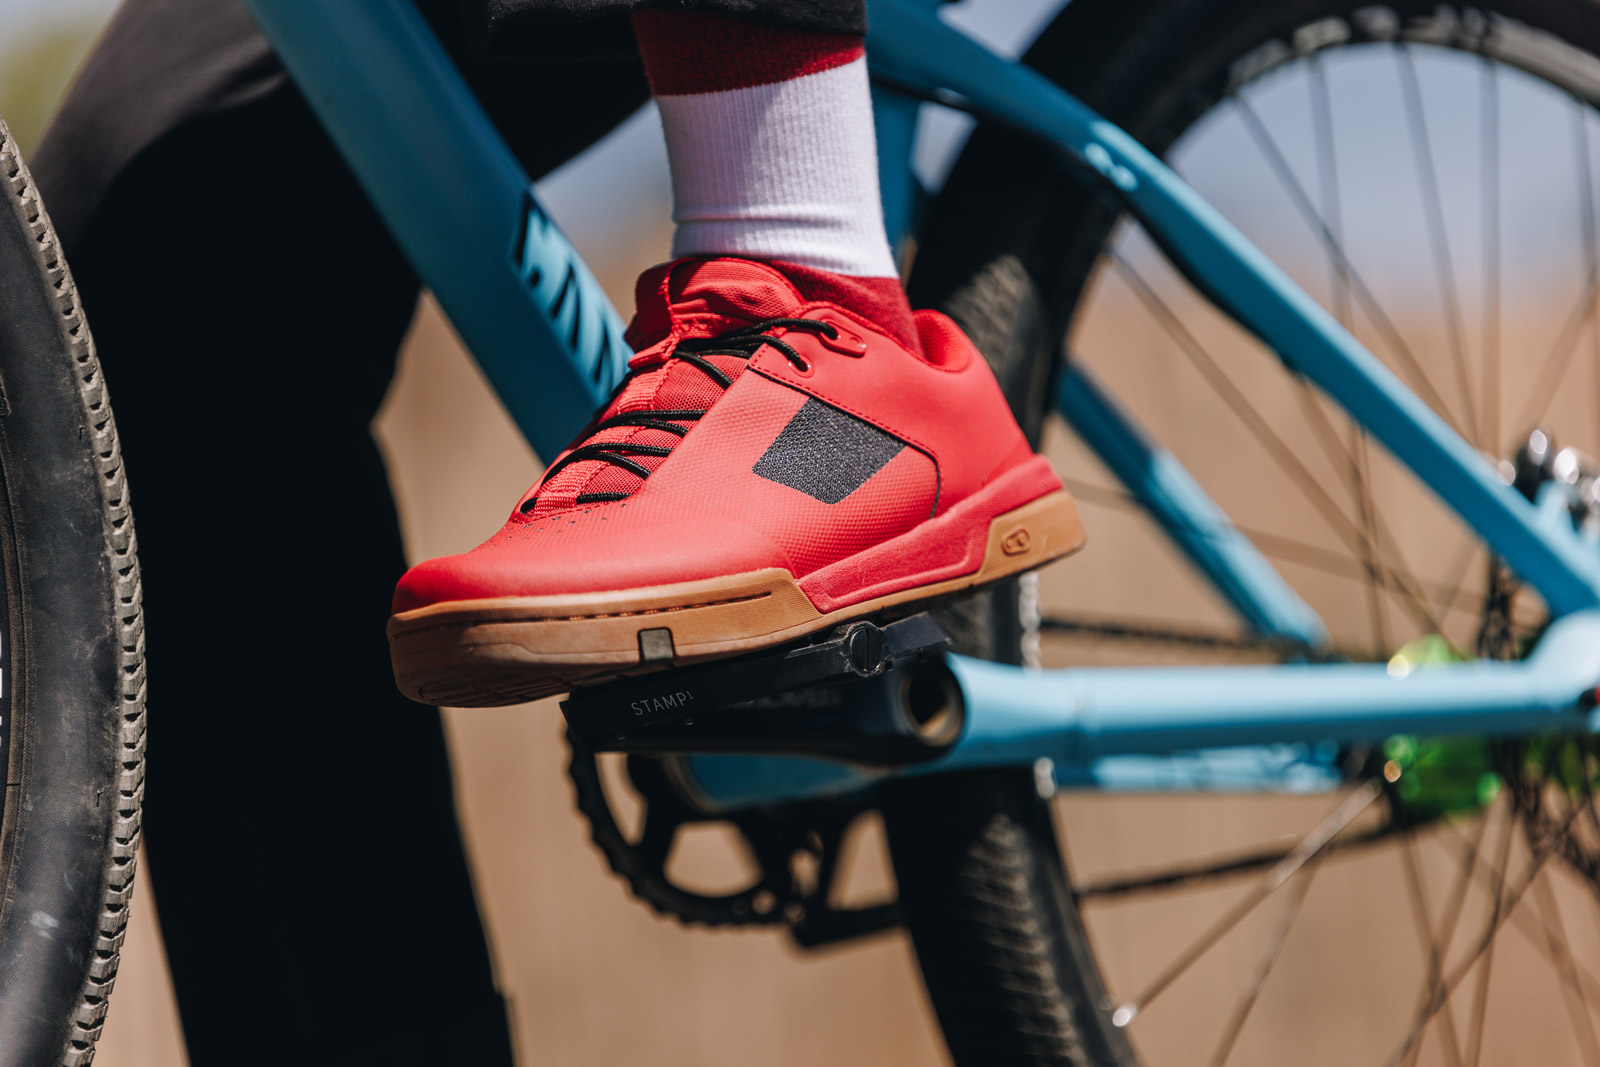 crankbrothers pump for peace red stamp lace mtb shoes